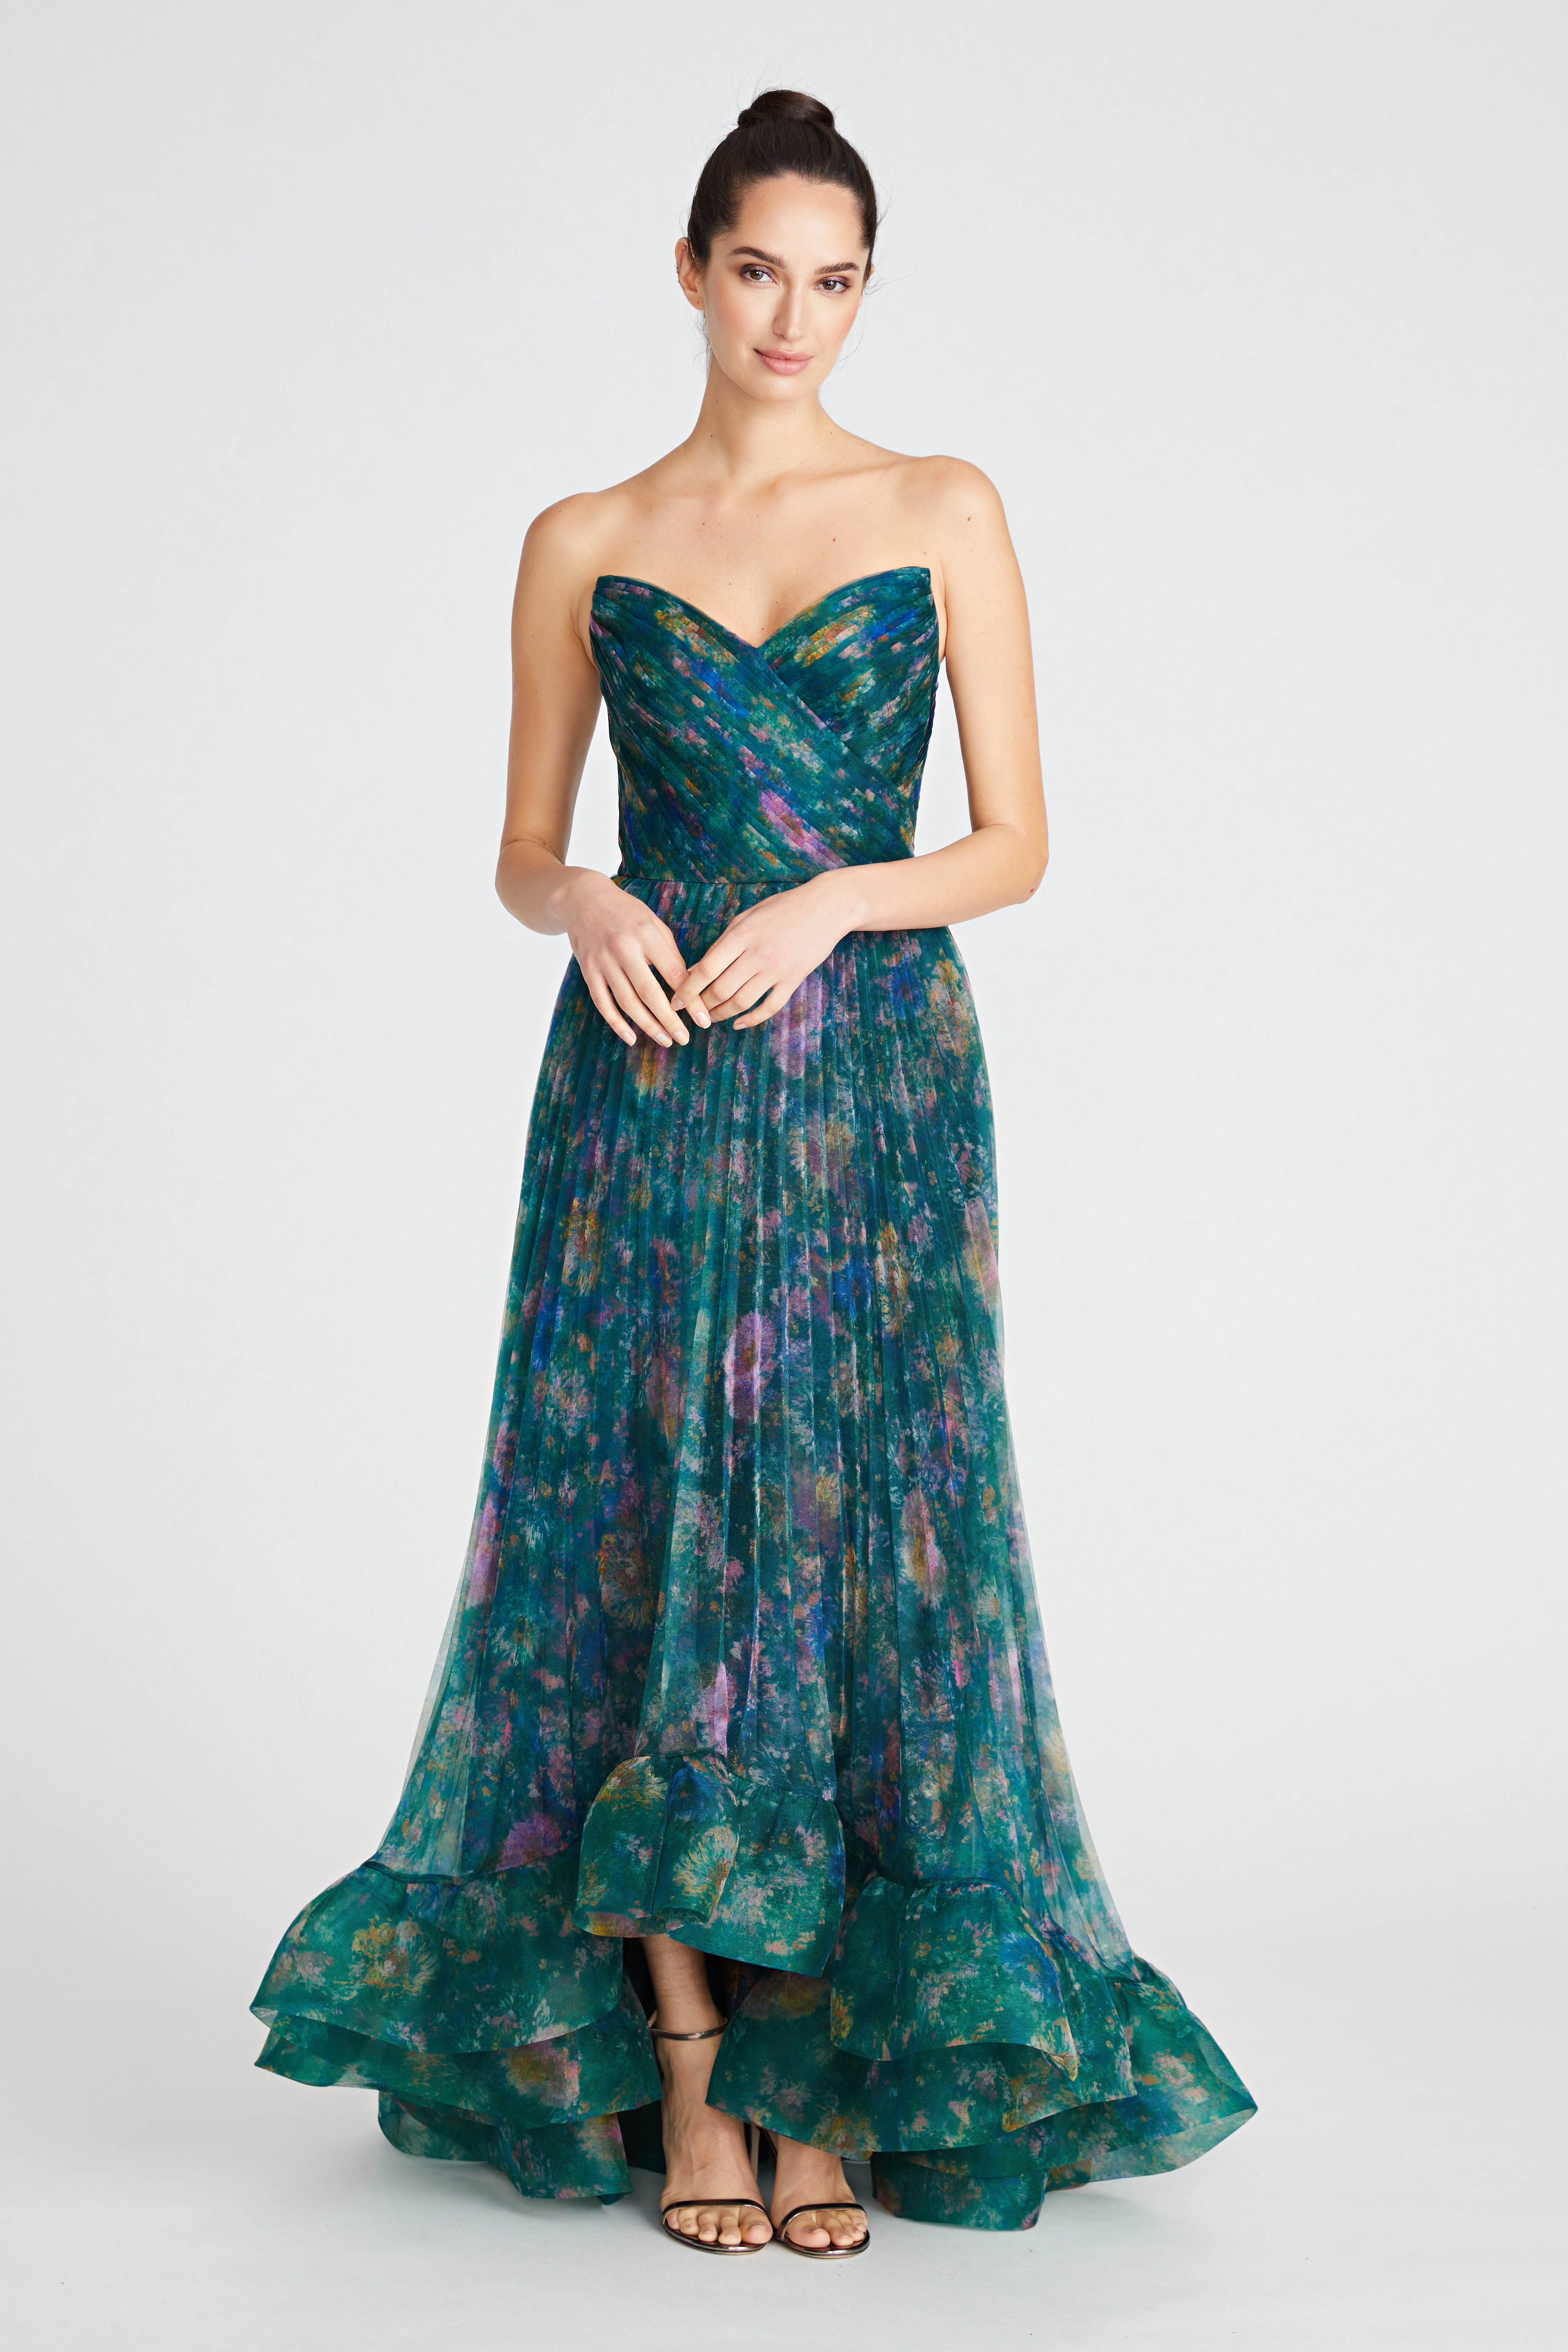 Moira Strapless High Low Gown